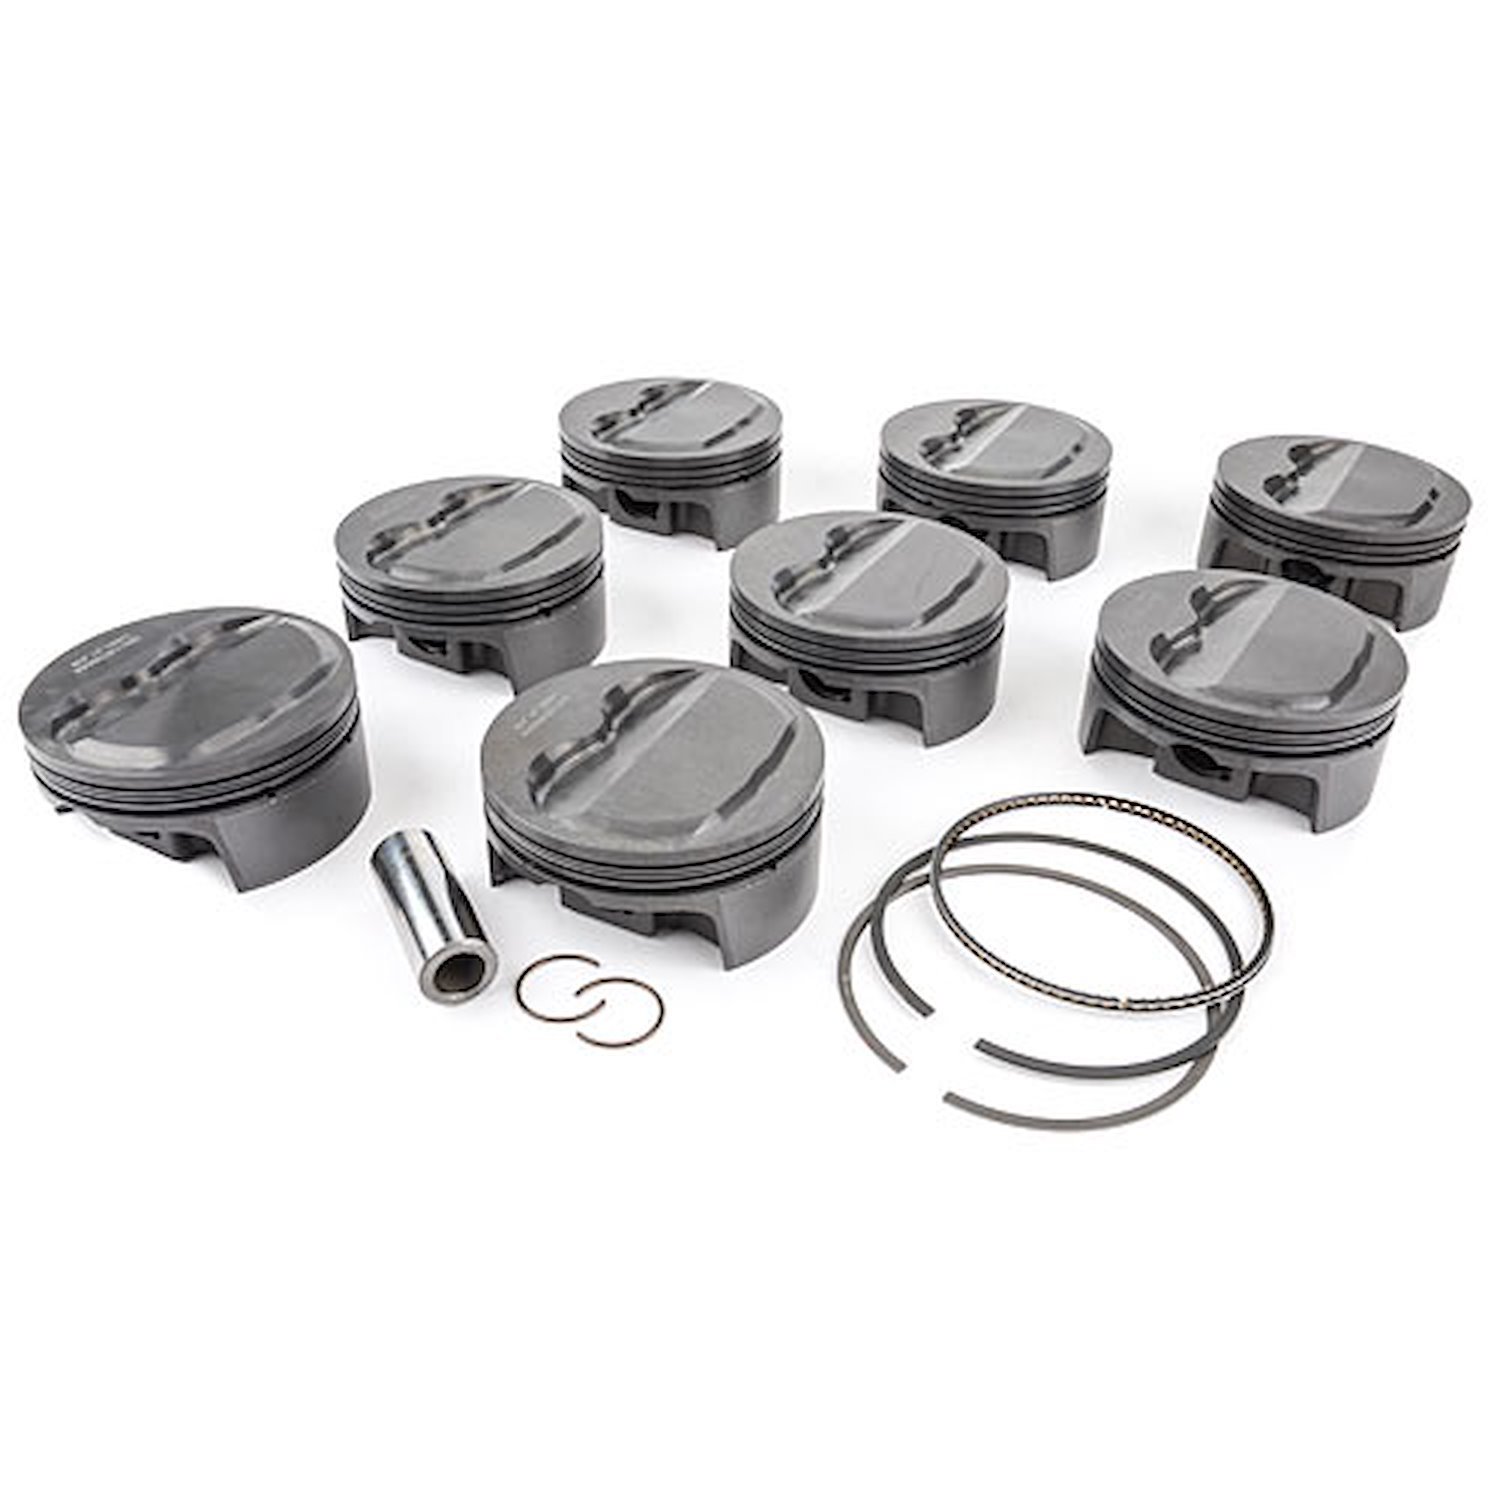 Hemi 5.7L PowerPak Piston & Ring Kit Forged 4032 High Silicon Low Expansion Aluminum Alloy